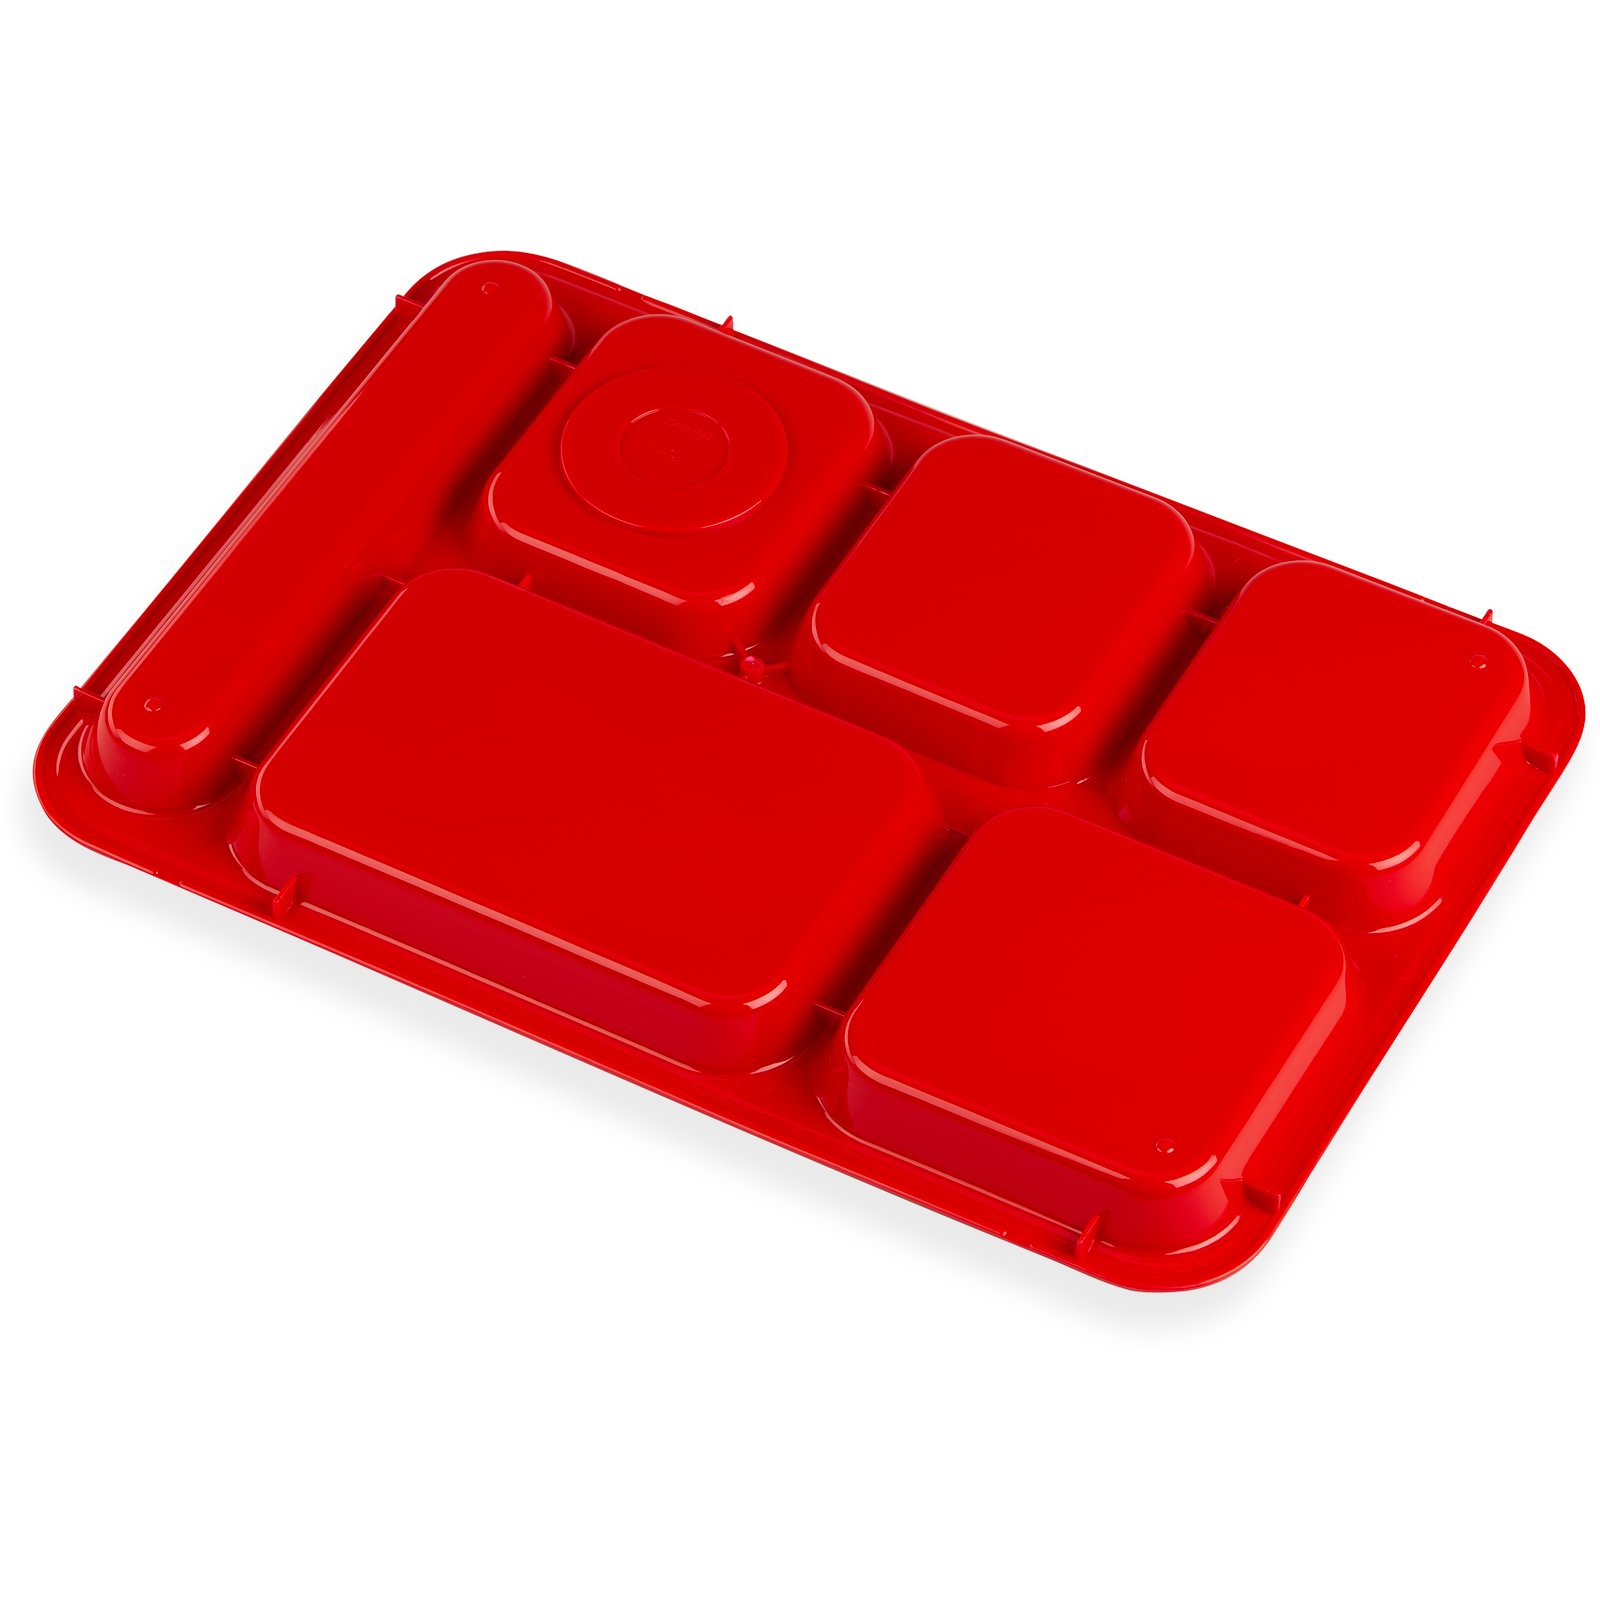 P614R05 - Right-Hand 6-Compartment Polypropylene Tray 10 x 14